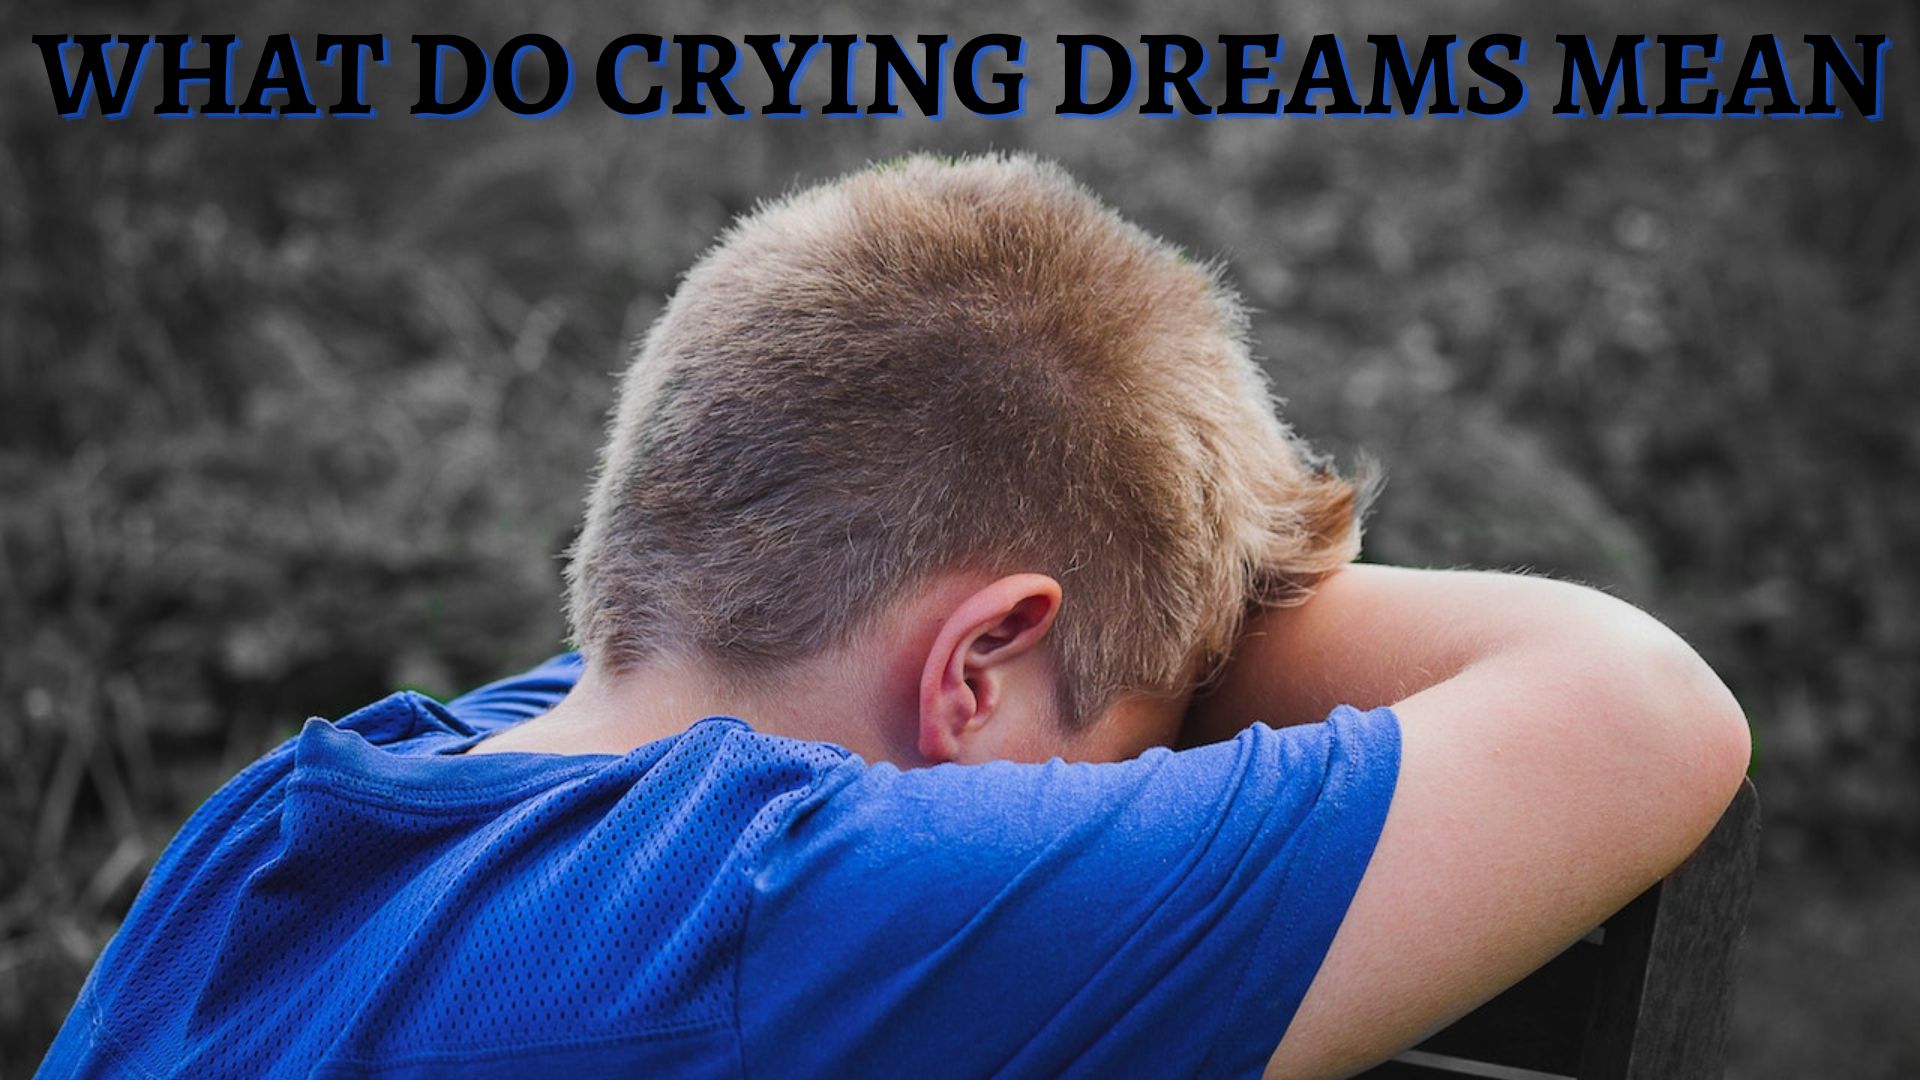 What Do Crying Dreams Mean?